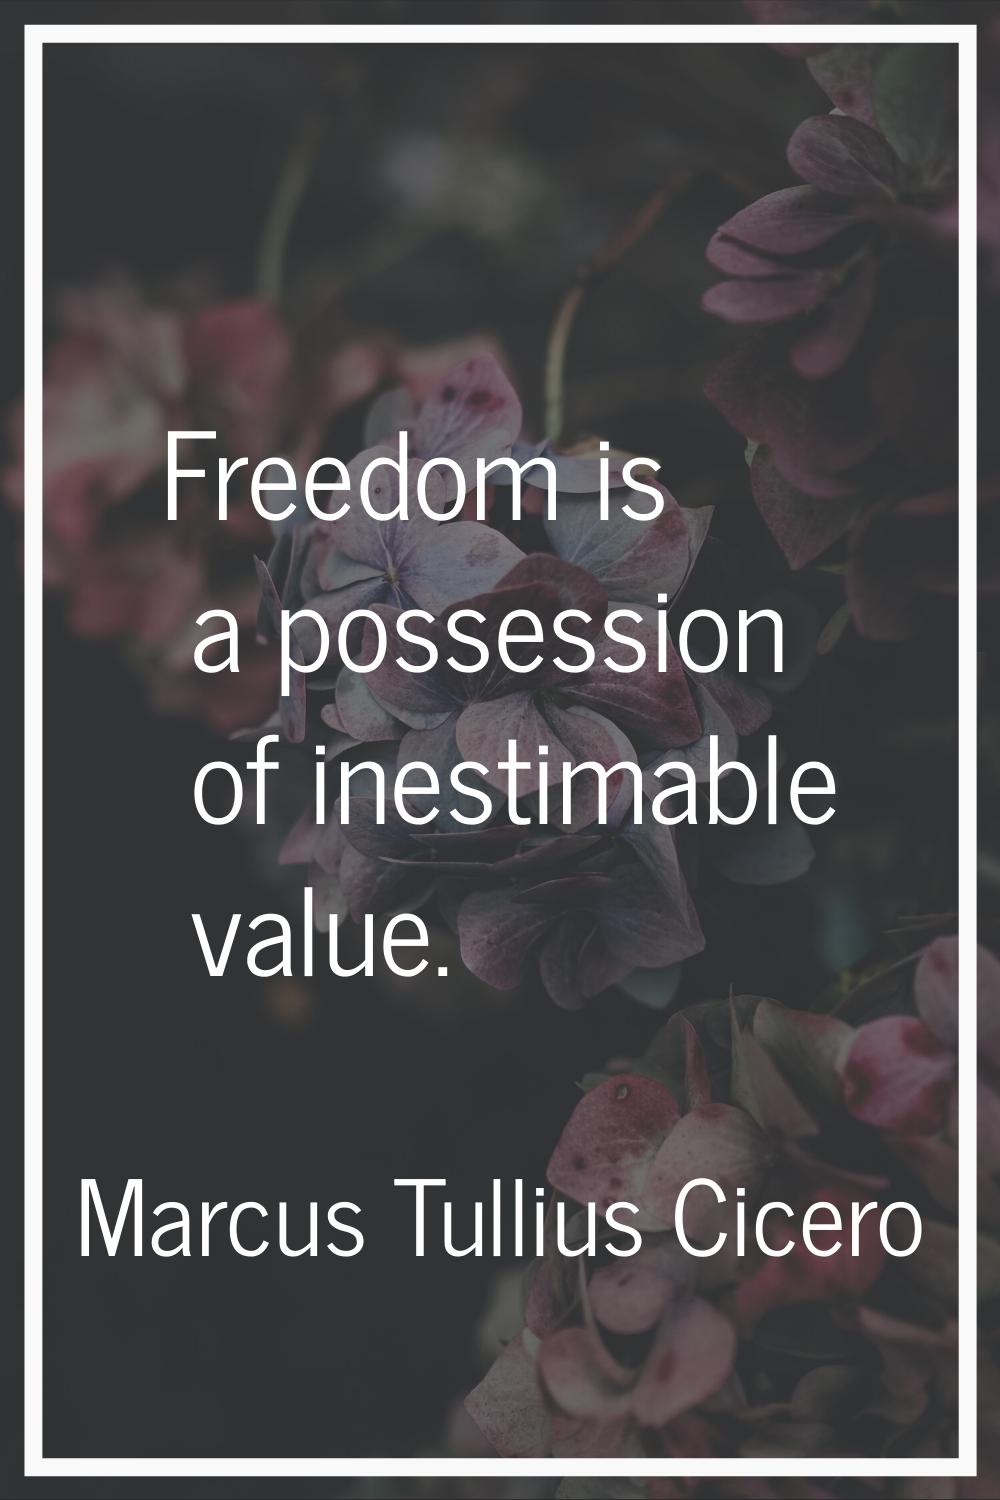 Freedom is a possession of inestimable value.